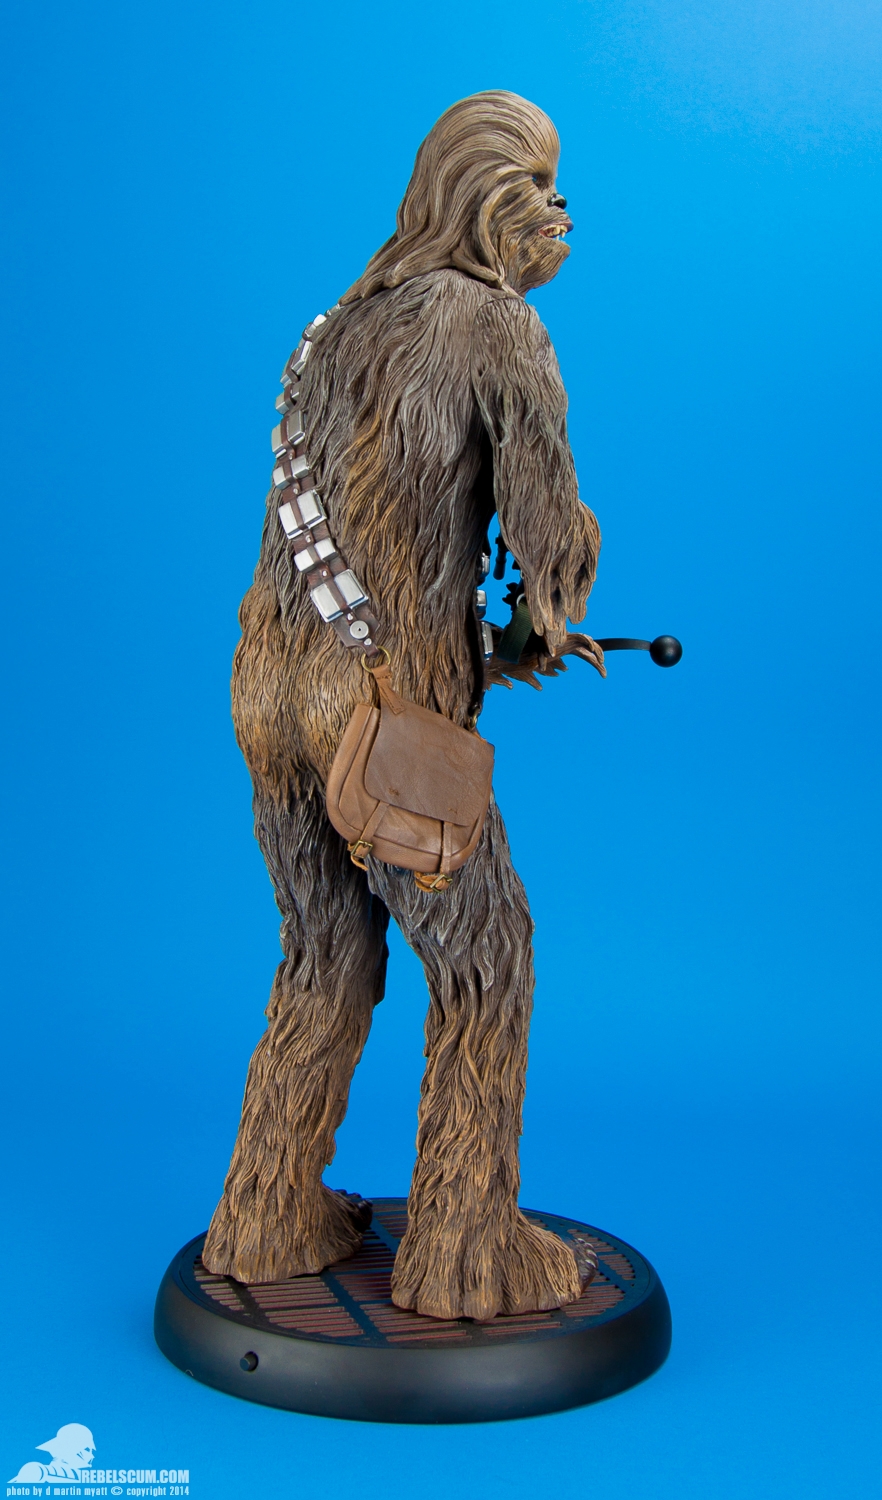 Chewbacca-Premium-Format-Figure-Sideshow-Collectibles-Exclusive-002.jpg